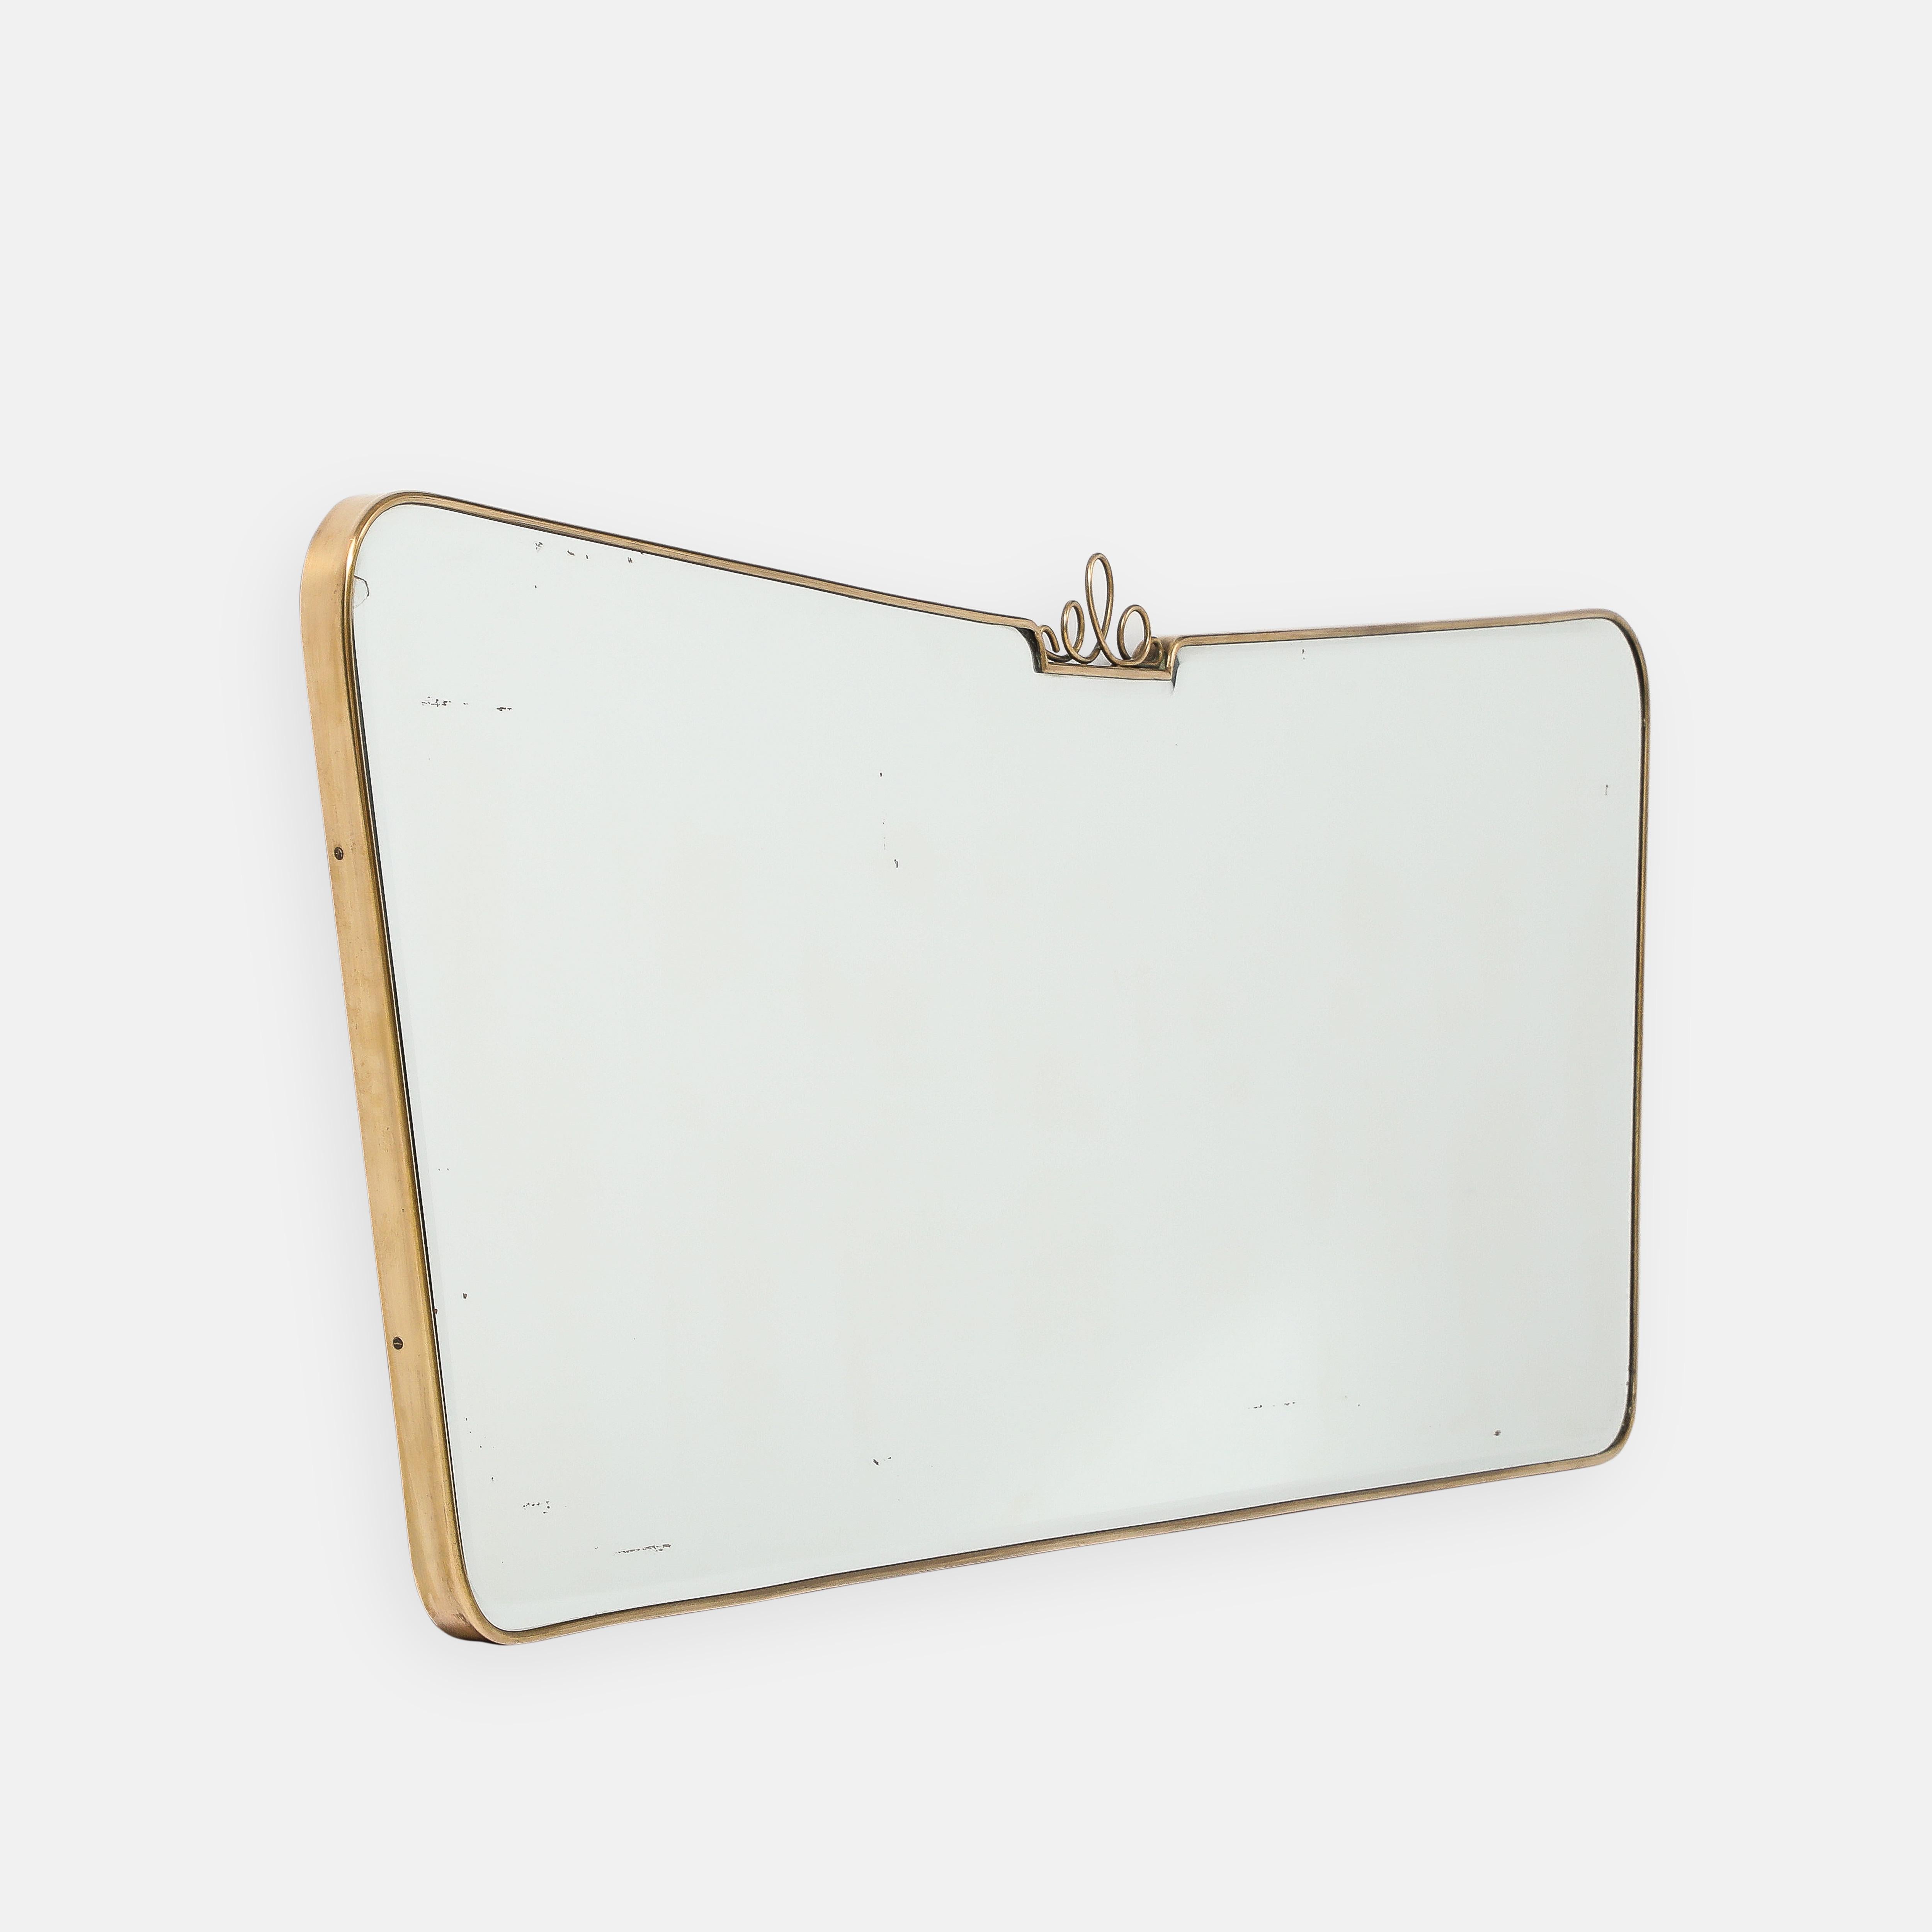 1950s Italian modernist horizontal overmantel brass mirror in the style of Gio Ponti.  This exquisite original beveled glass mirror has a gently curved brass frame with rounded corners and gently tapering sides, central top decorative brass scroll